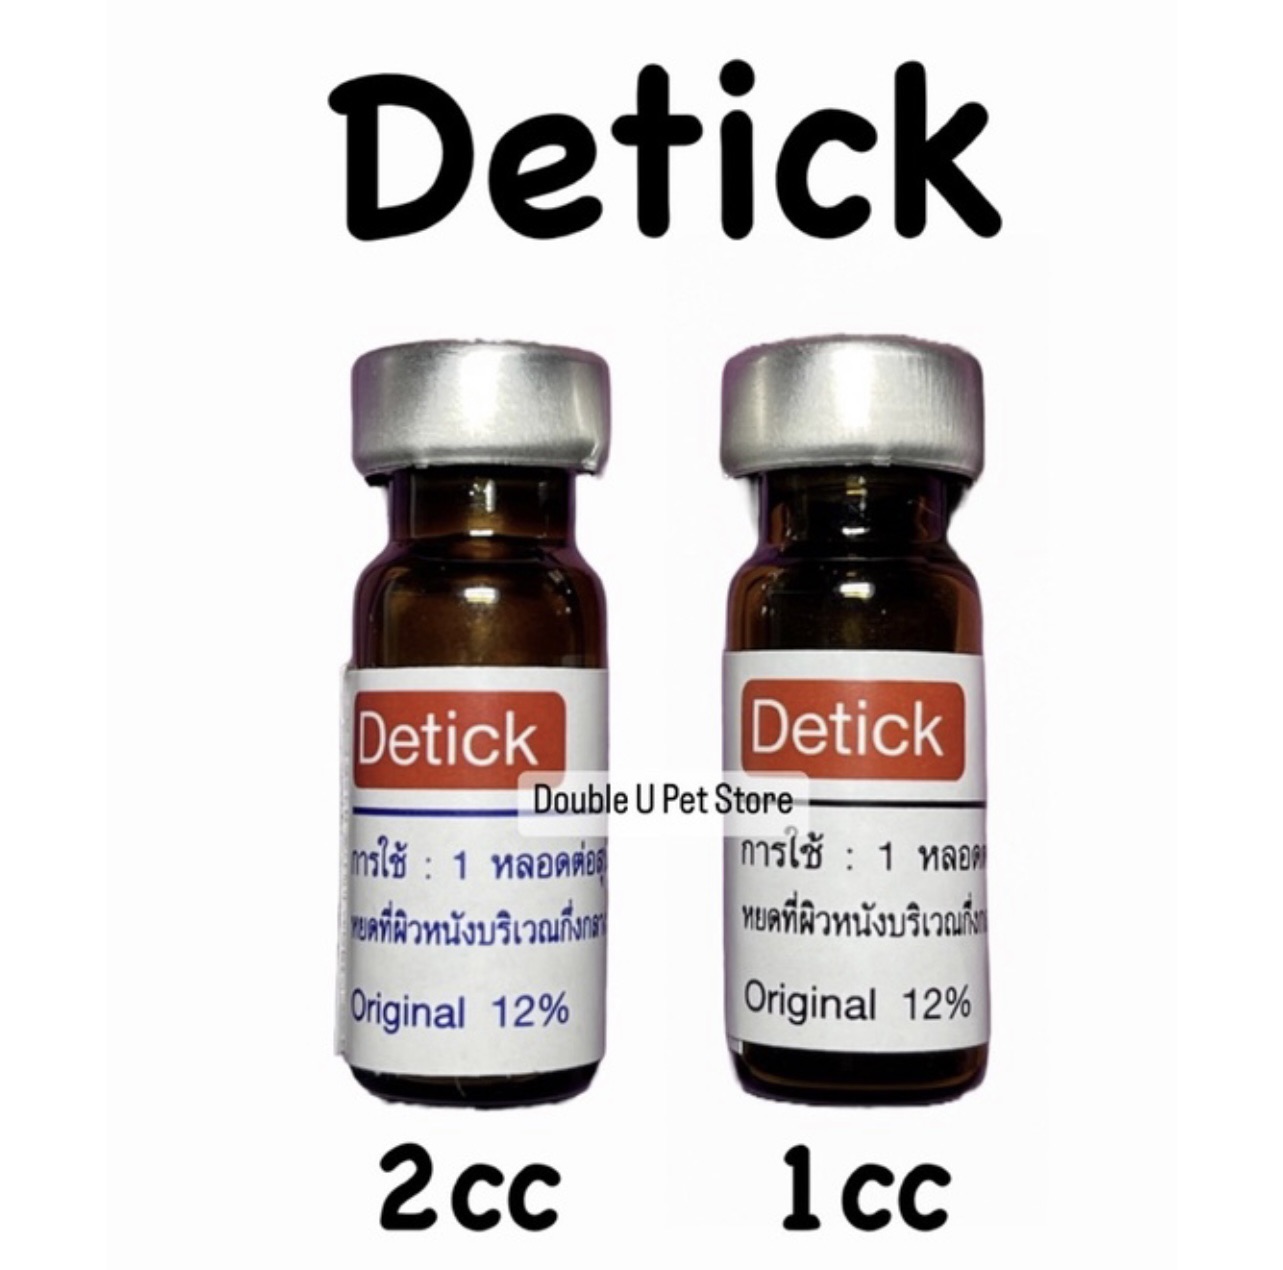 Detick 1cc & 2cc Anti Fleas & Tick for Dogs and Cats